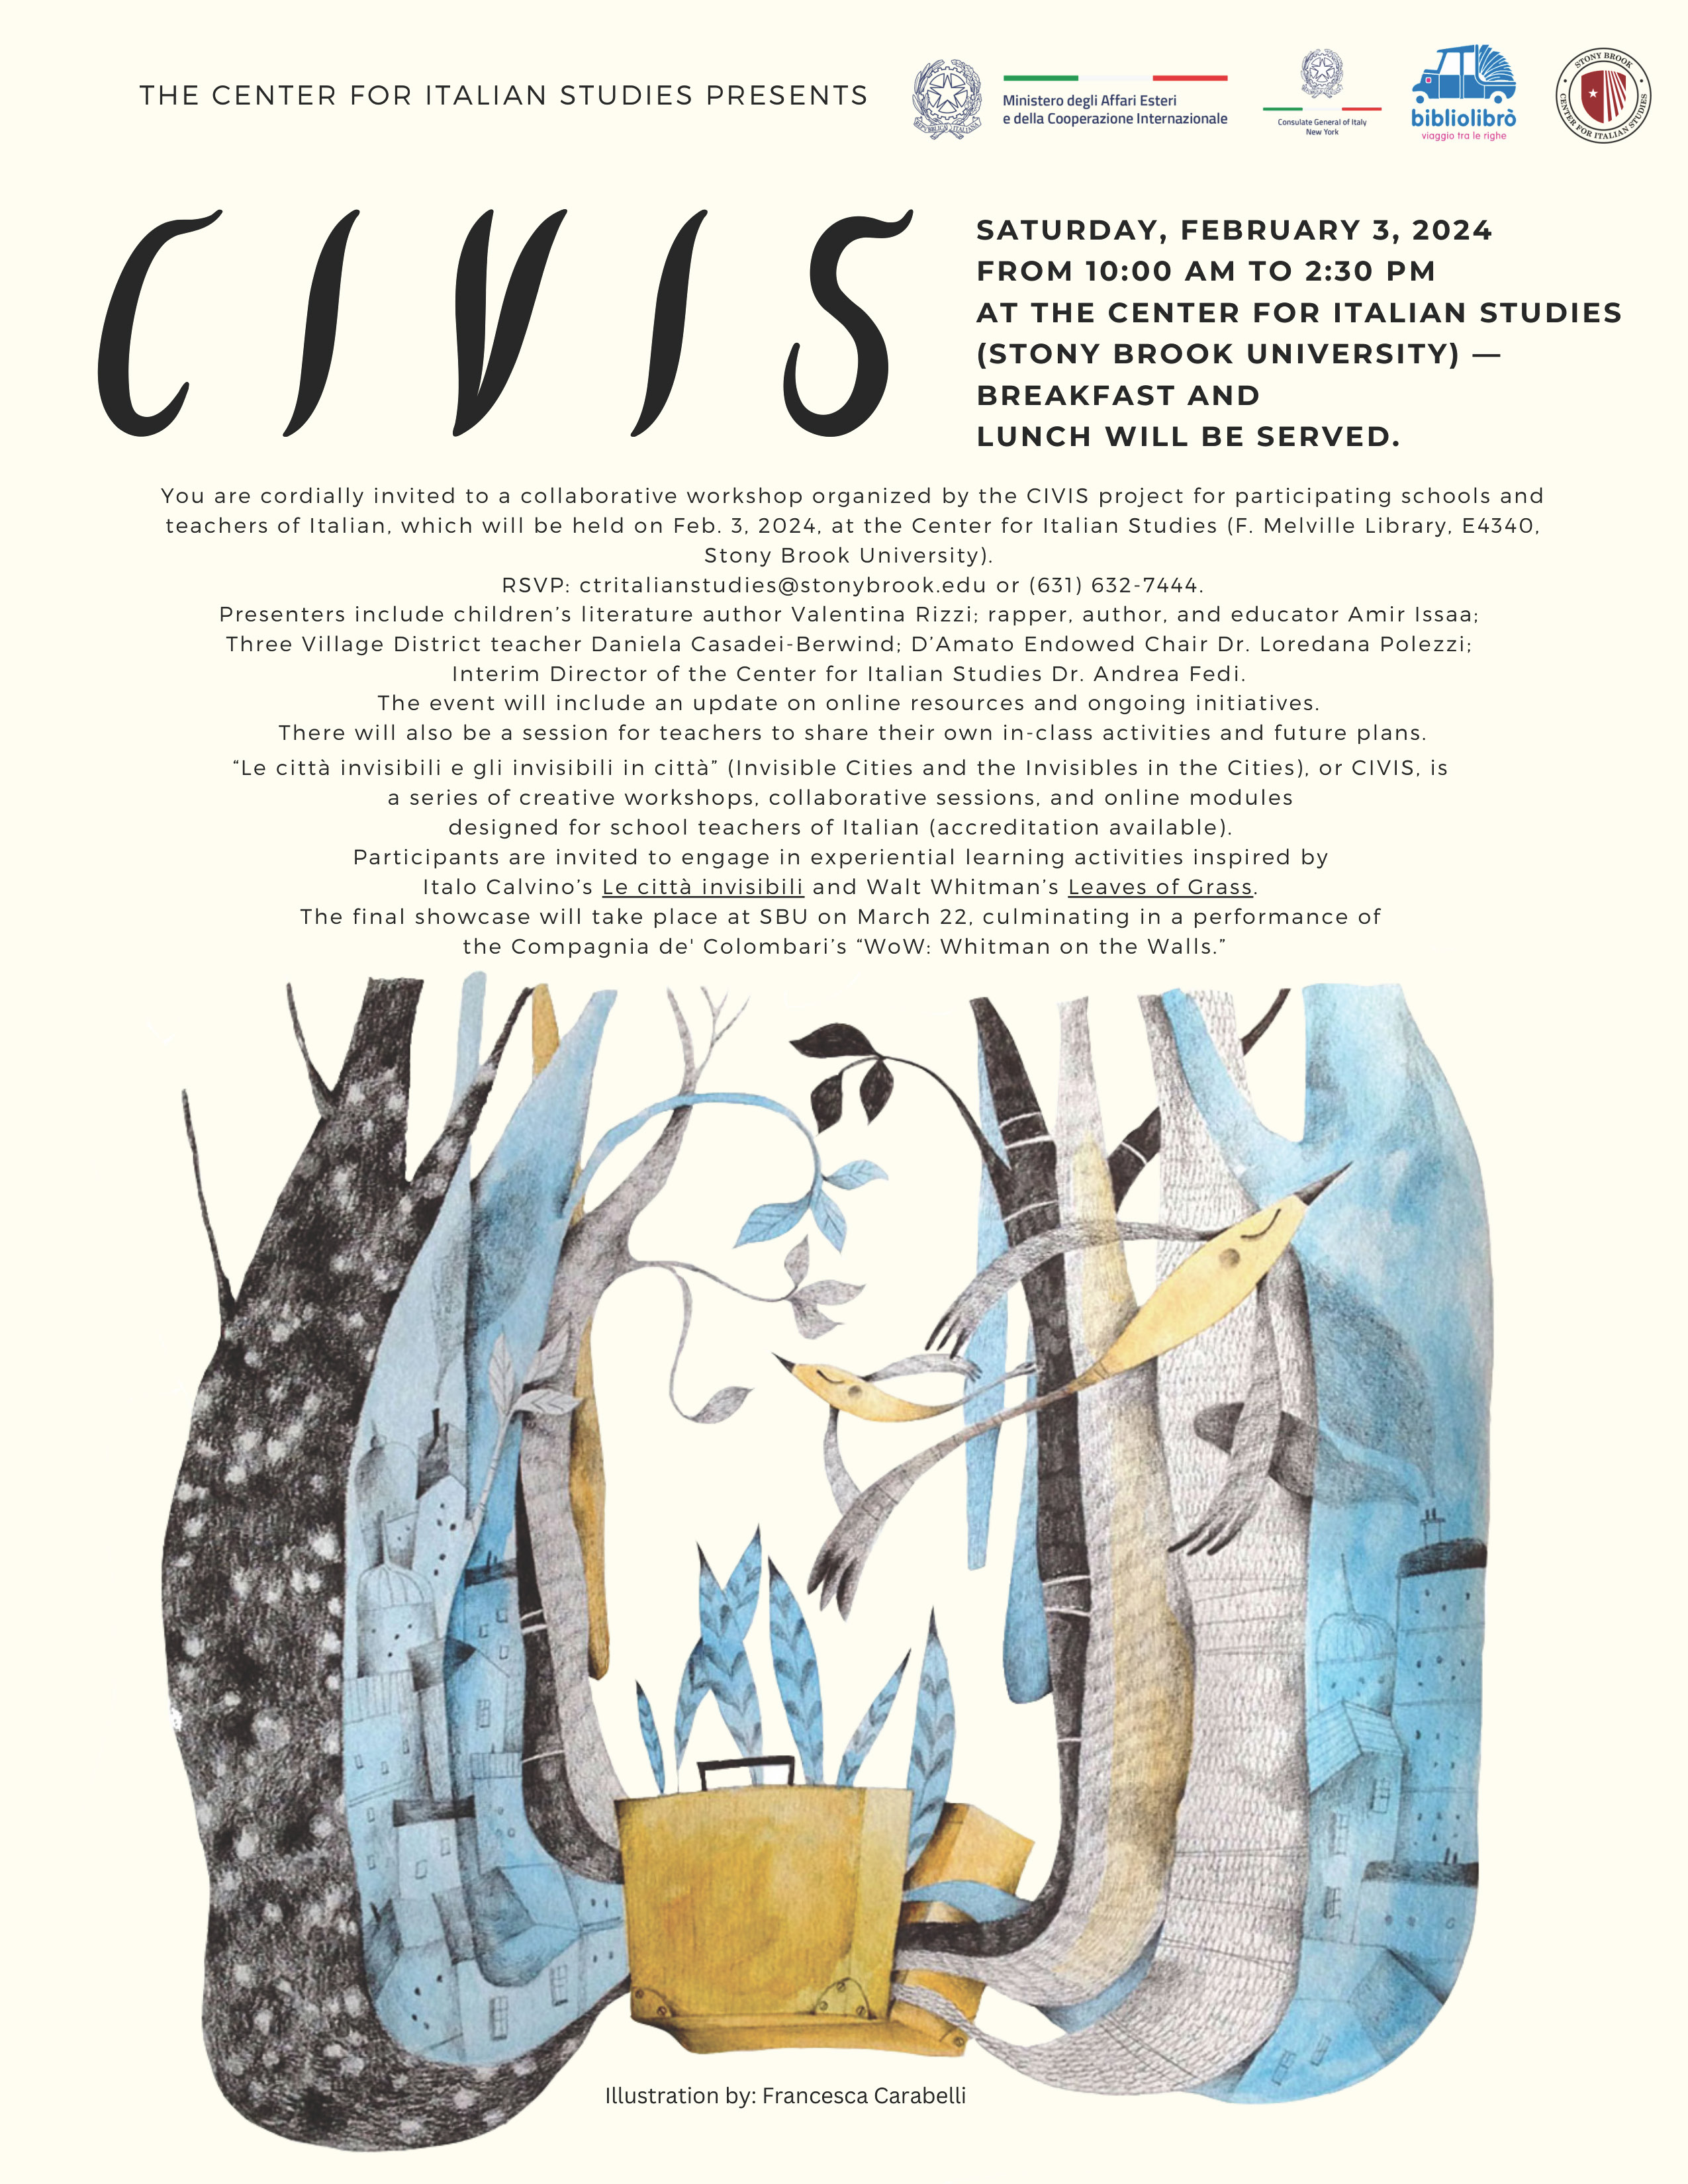 Poster of CIVIS event on Feb. 3, 2023